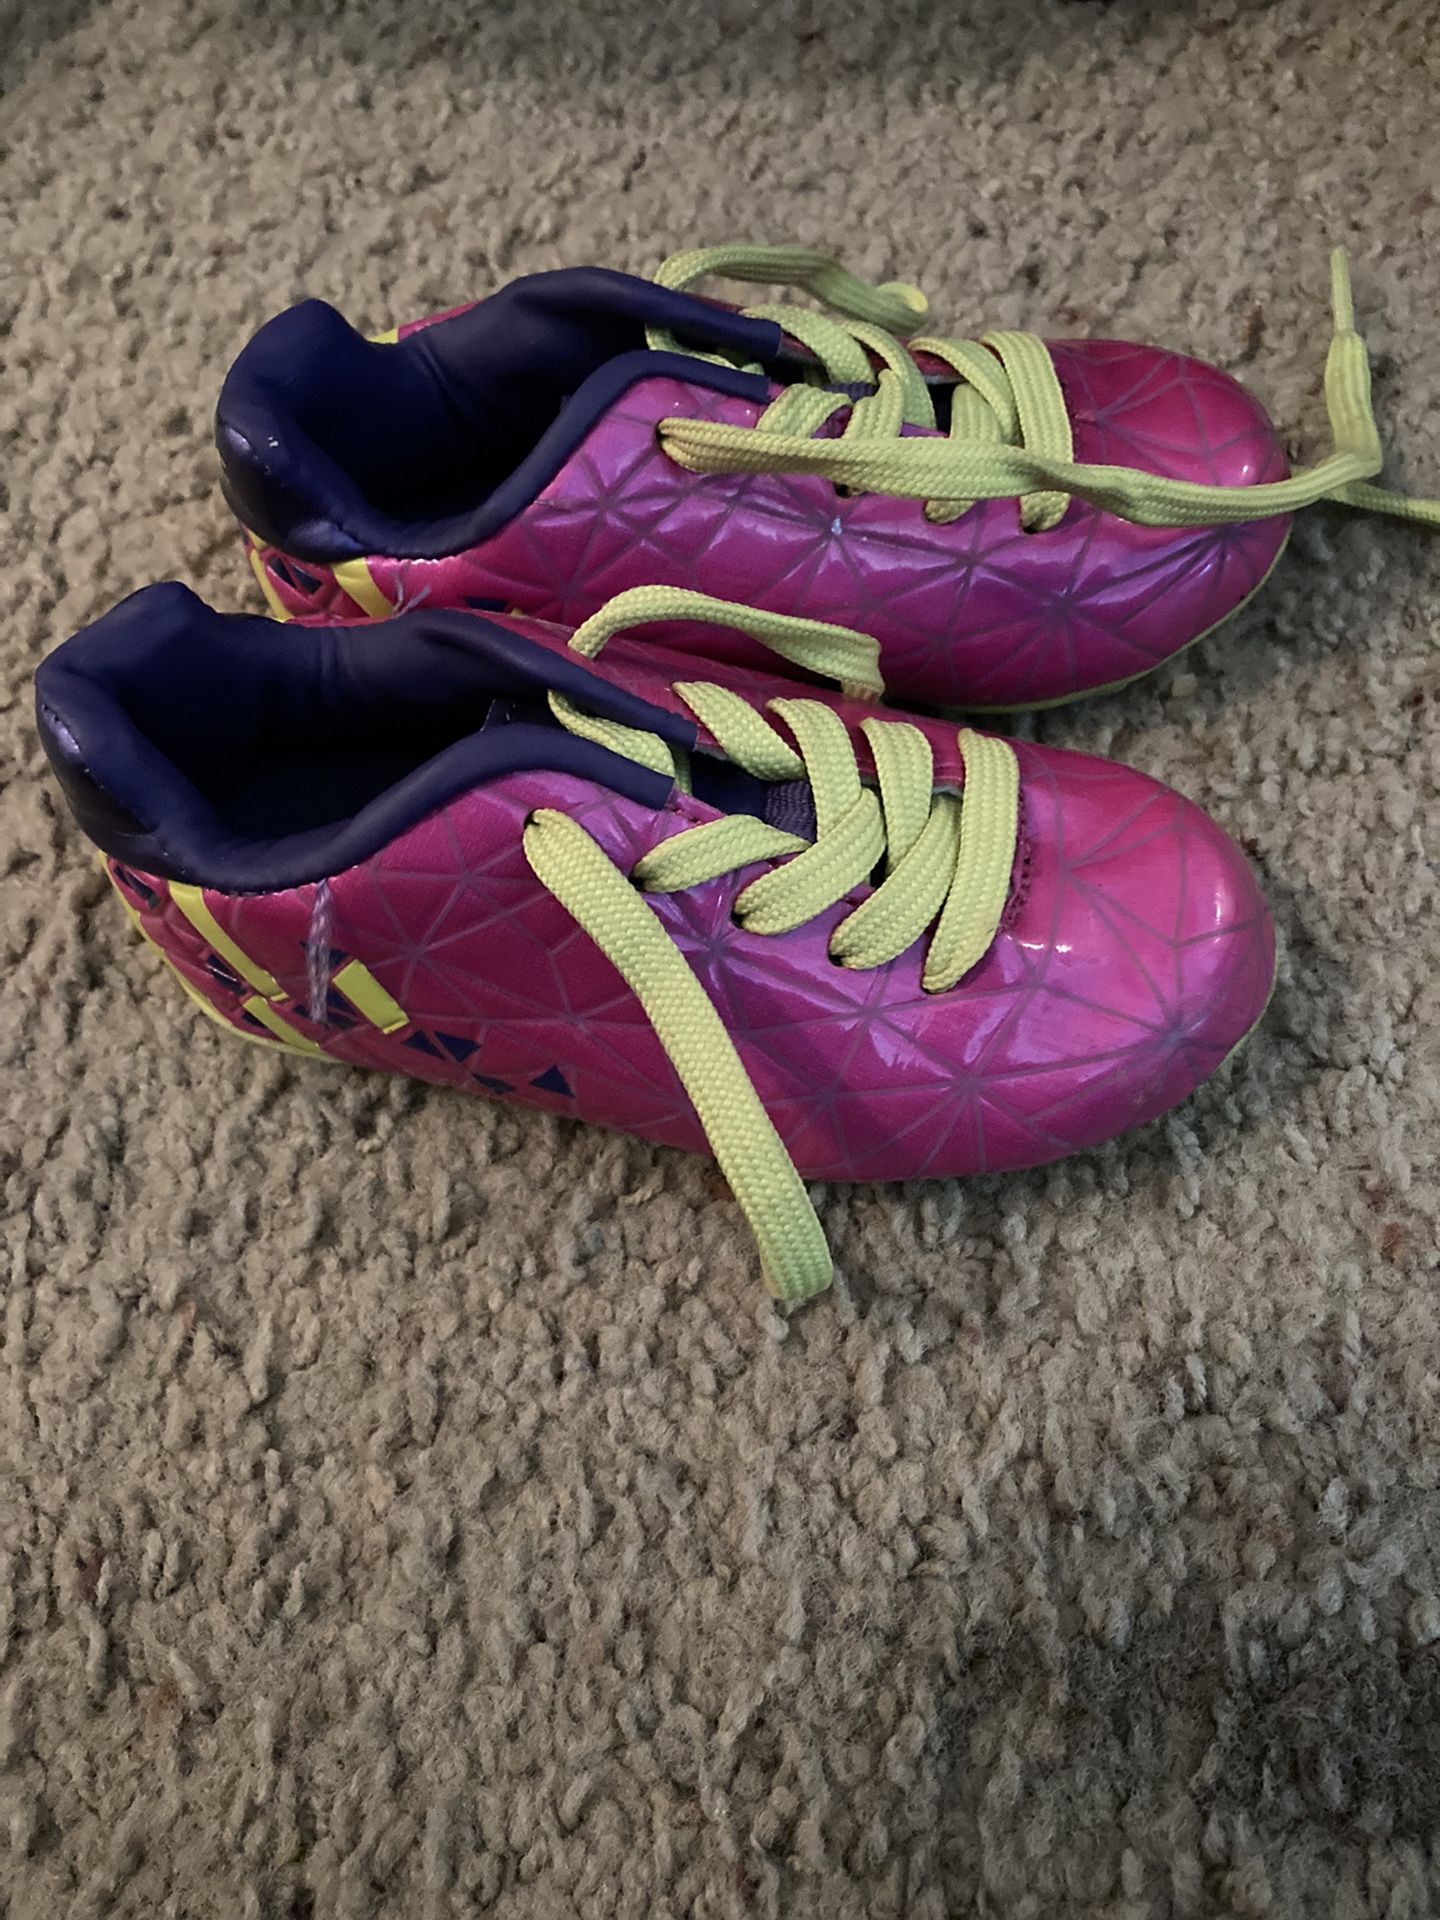 Toddler Cleats Size 8